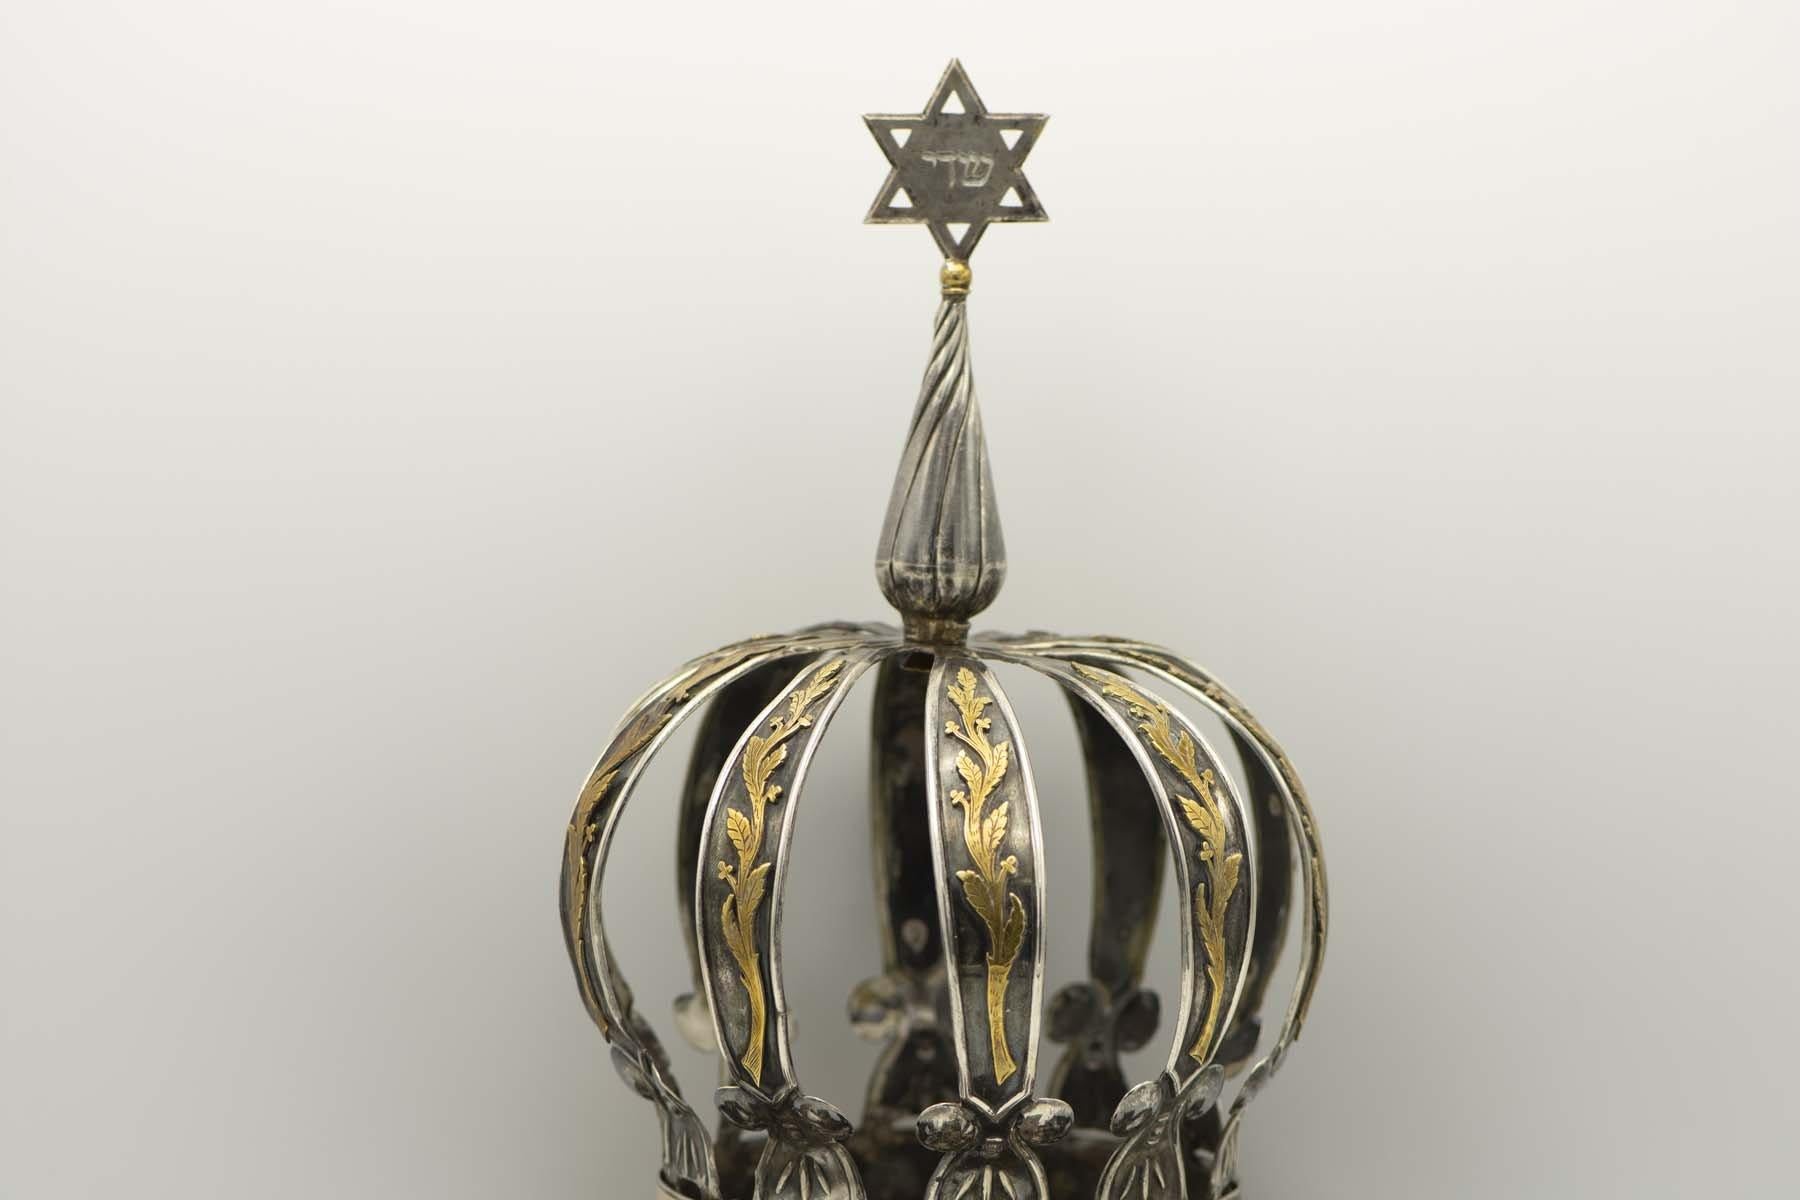 Silver and gold Torah crown, Buenos Aires, Argentina, 1925.
On silver base decorated with a small gold Stars of David. The lower ribs decorated with applied lattice work holding up a second crown topped with a Star of David. The upper gold band